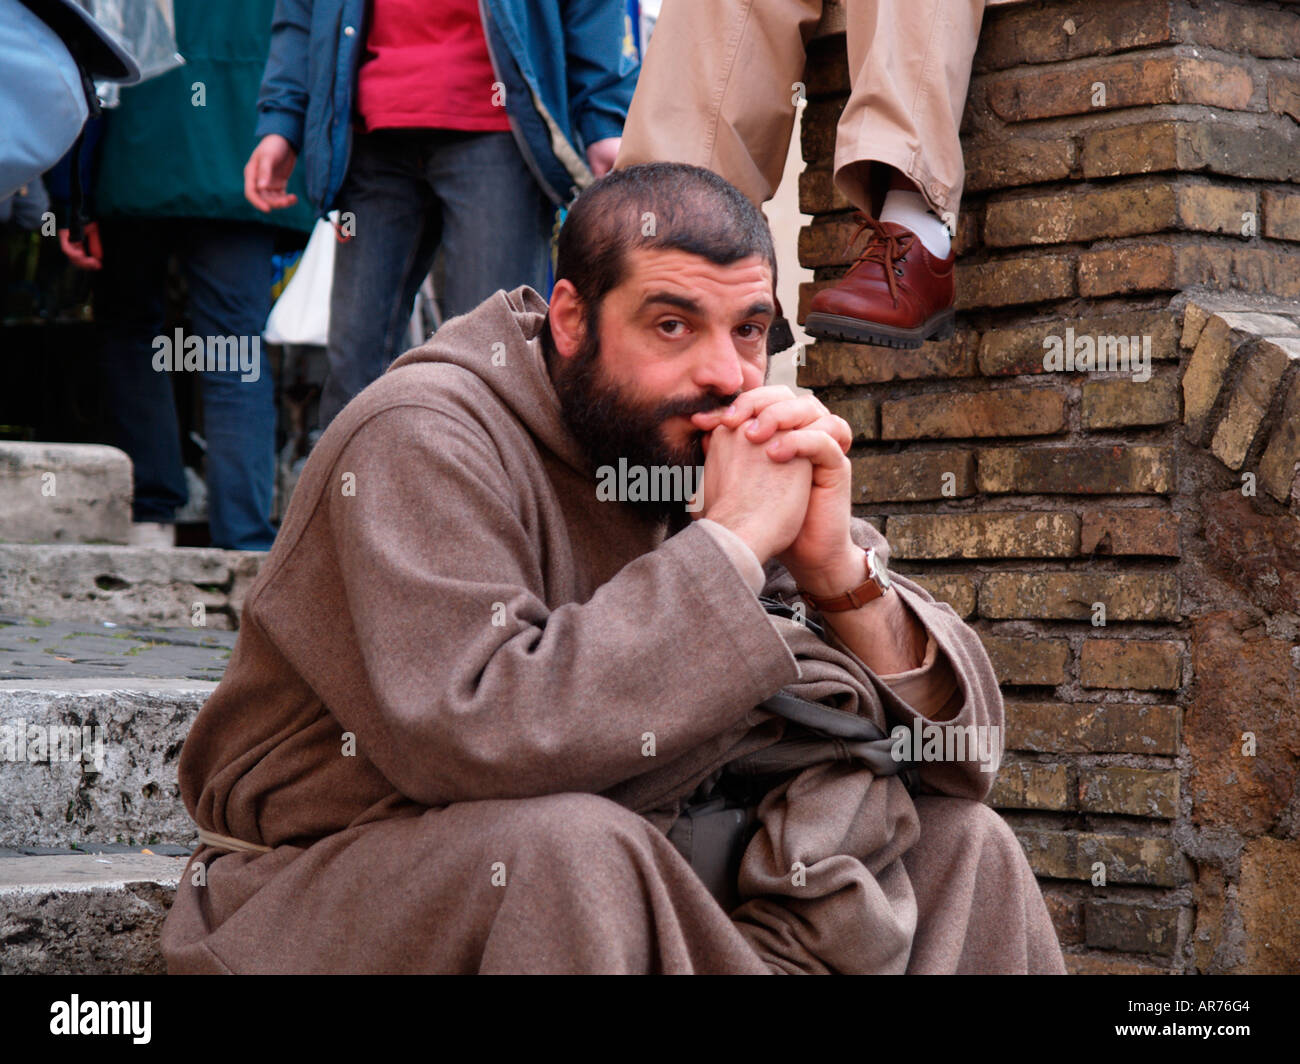 monk sat on steps looking pensive the day before funeral of Pope John Paul ll Stock Photo